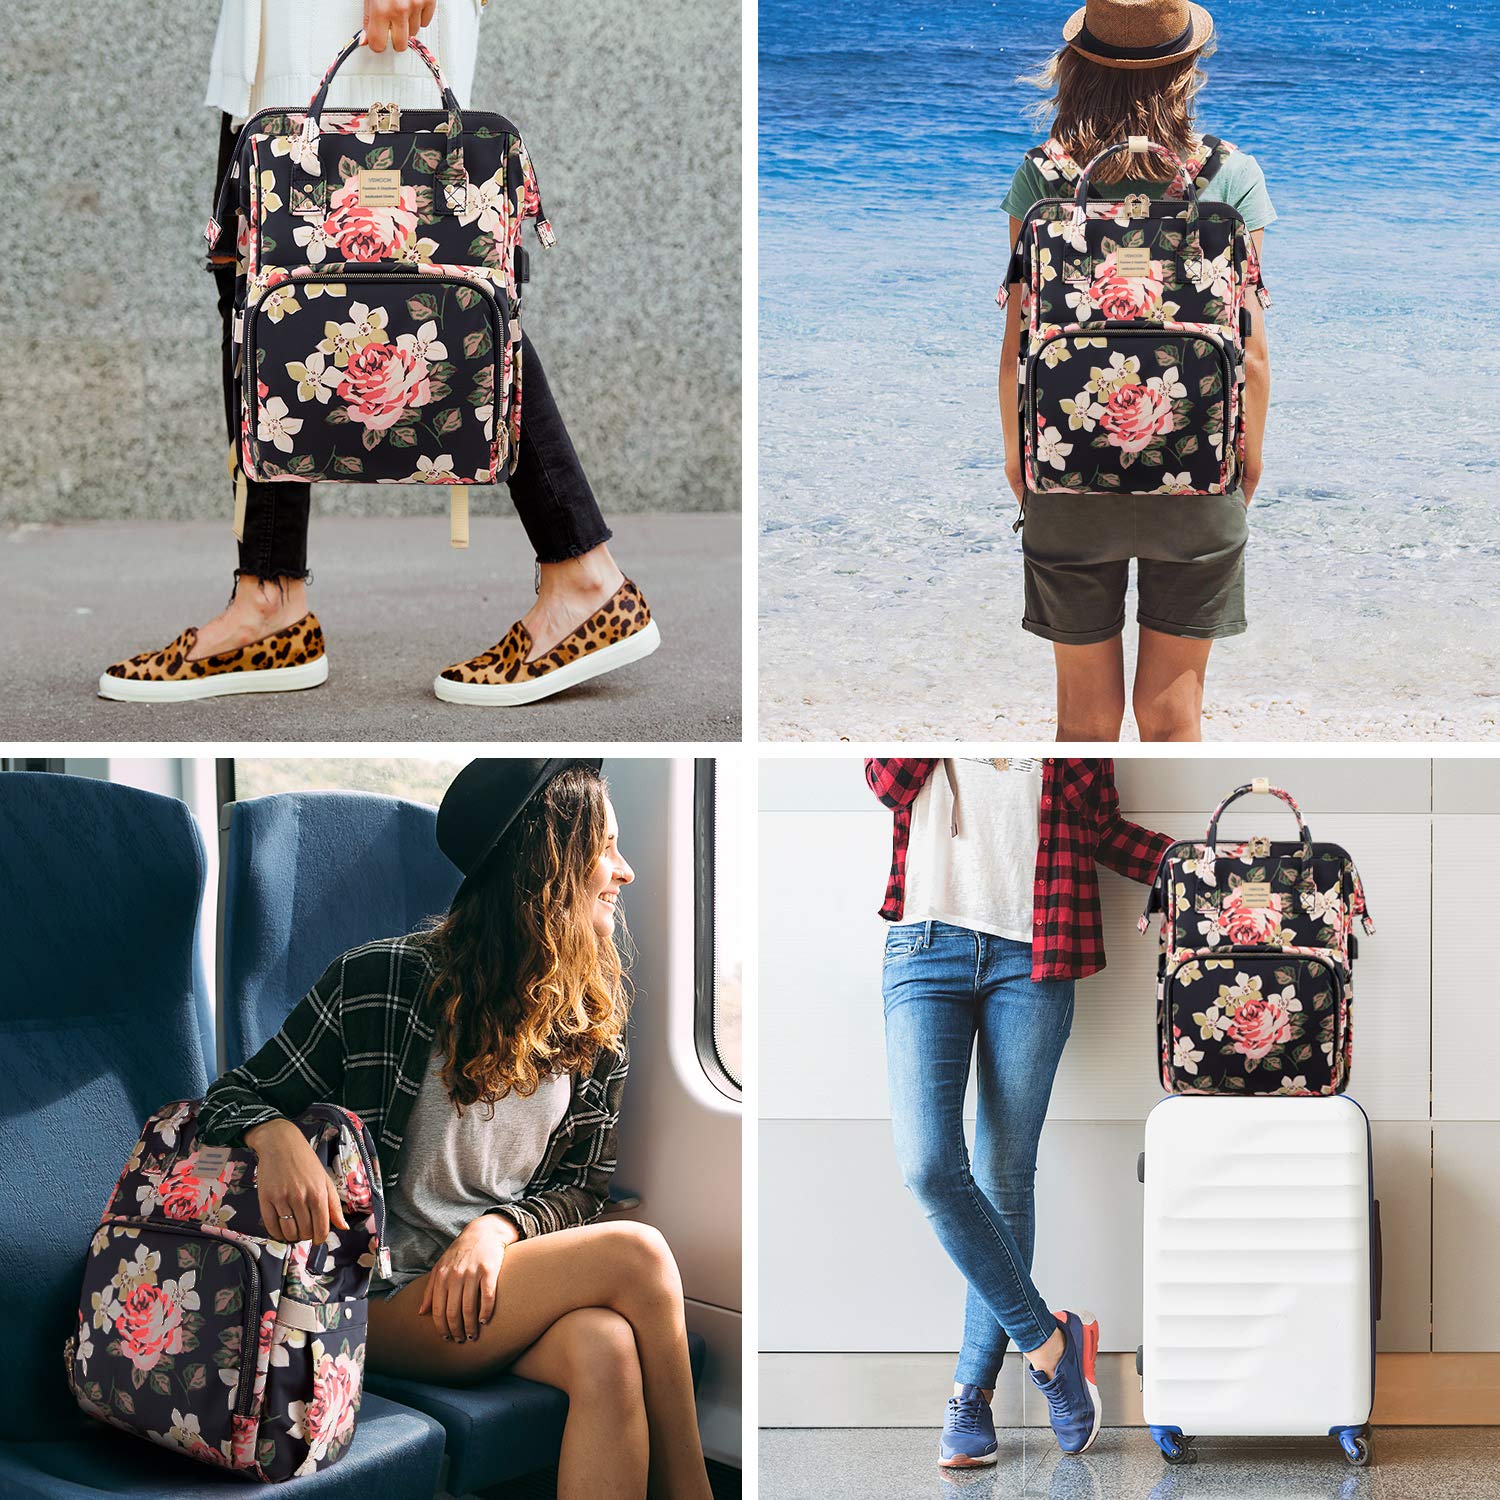 Laptop Backpack for Women,15.6 Inch Stylish College School Backpack with USB Charging Port,Water Resistant Casual Daypack Laptop Backpack for Girls/Nurse/Teacher/Travel (Flower Pattern)